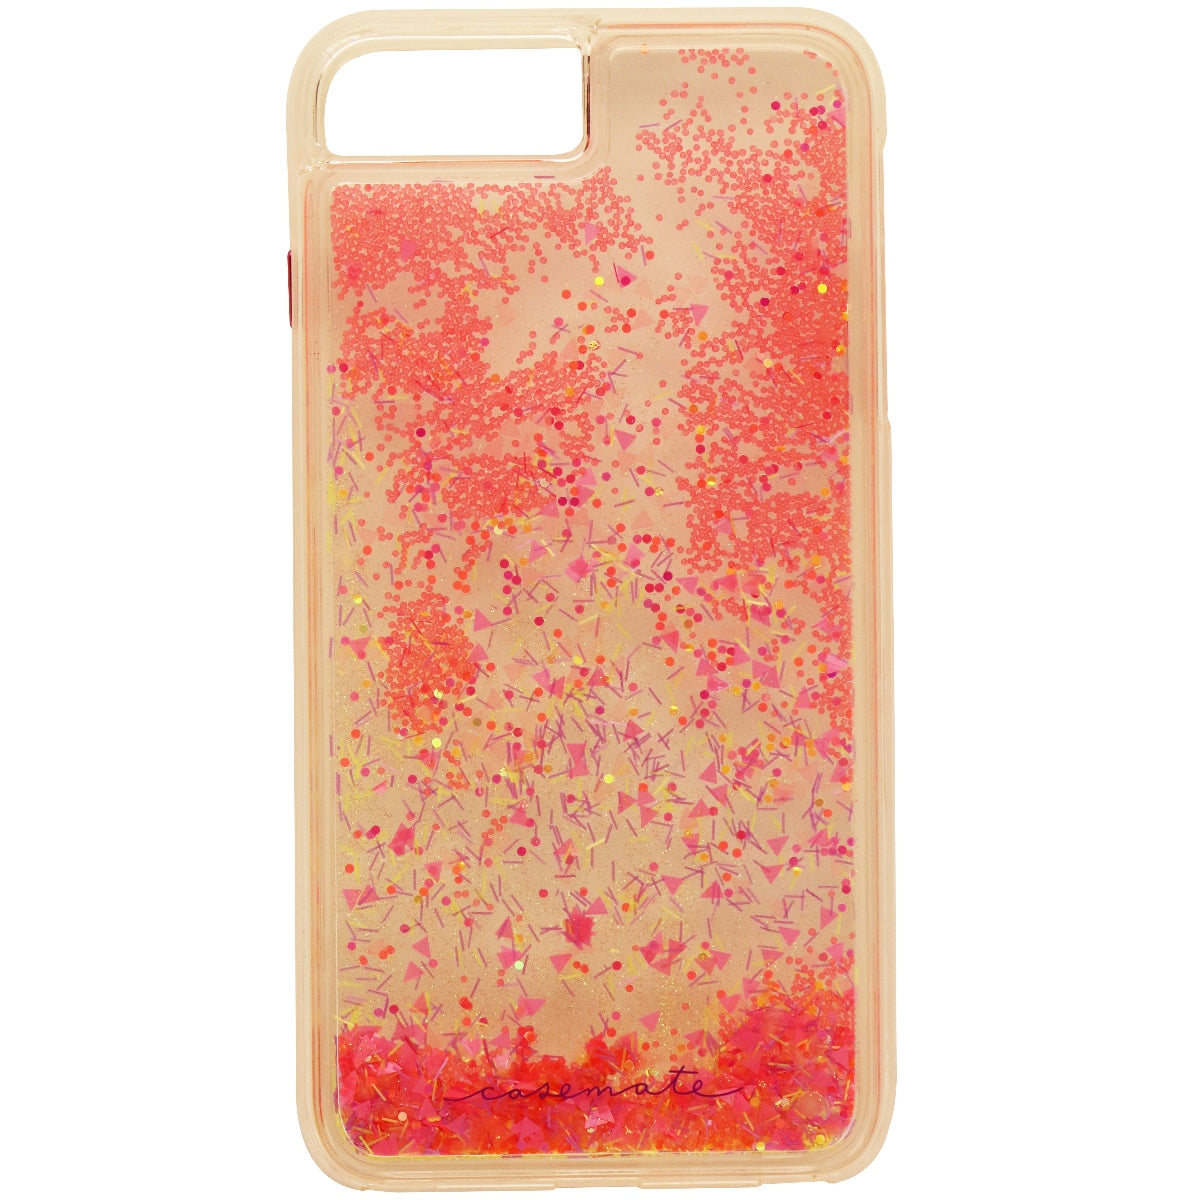 Case-Mate Waterfall Glow Case for iPhone 8 Plus 7 Plus - Pink/Multi Glitter Cell Phone - Cases, Covers & Skins Case-Mate    - Simple Cell Bulk Wholesale Pricing - USA Seller